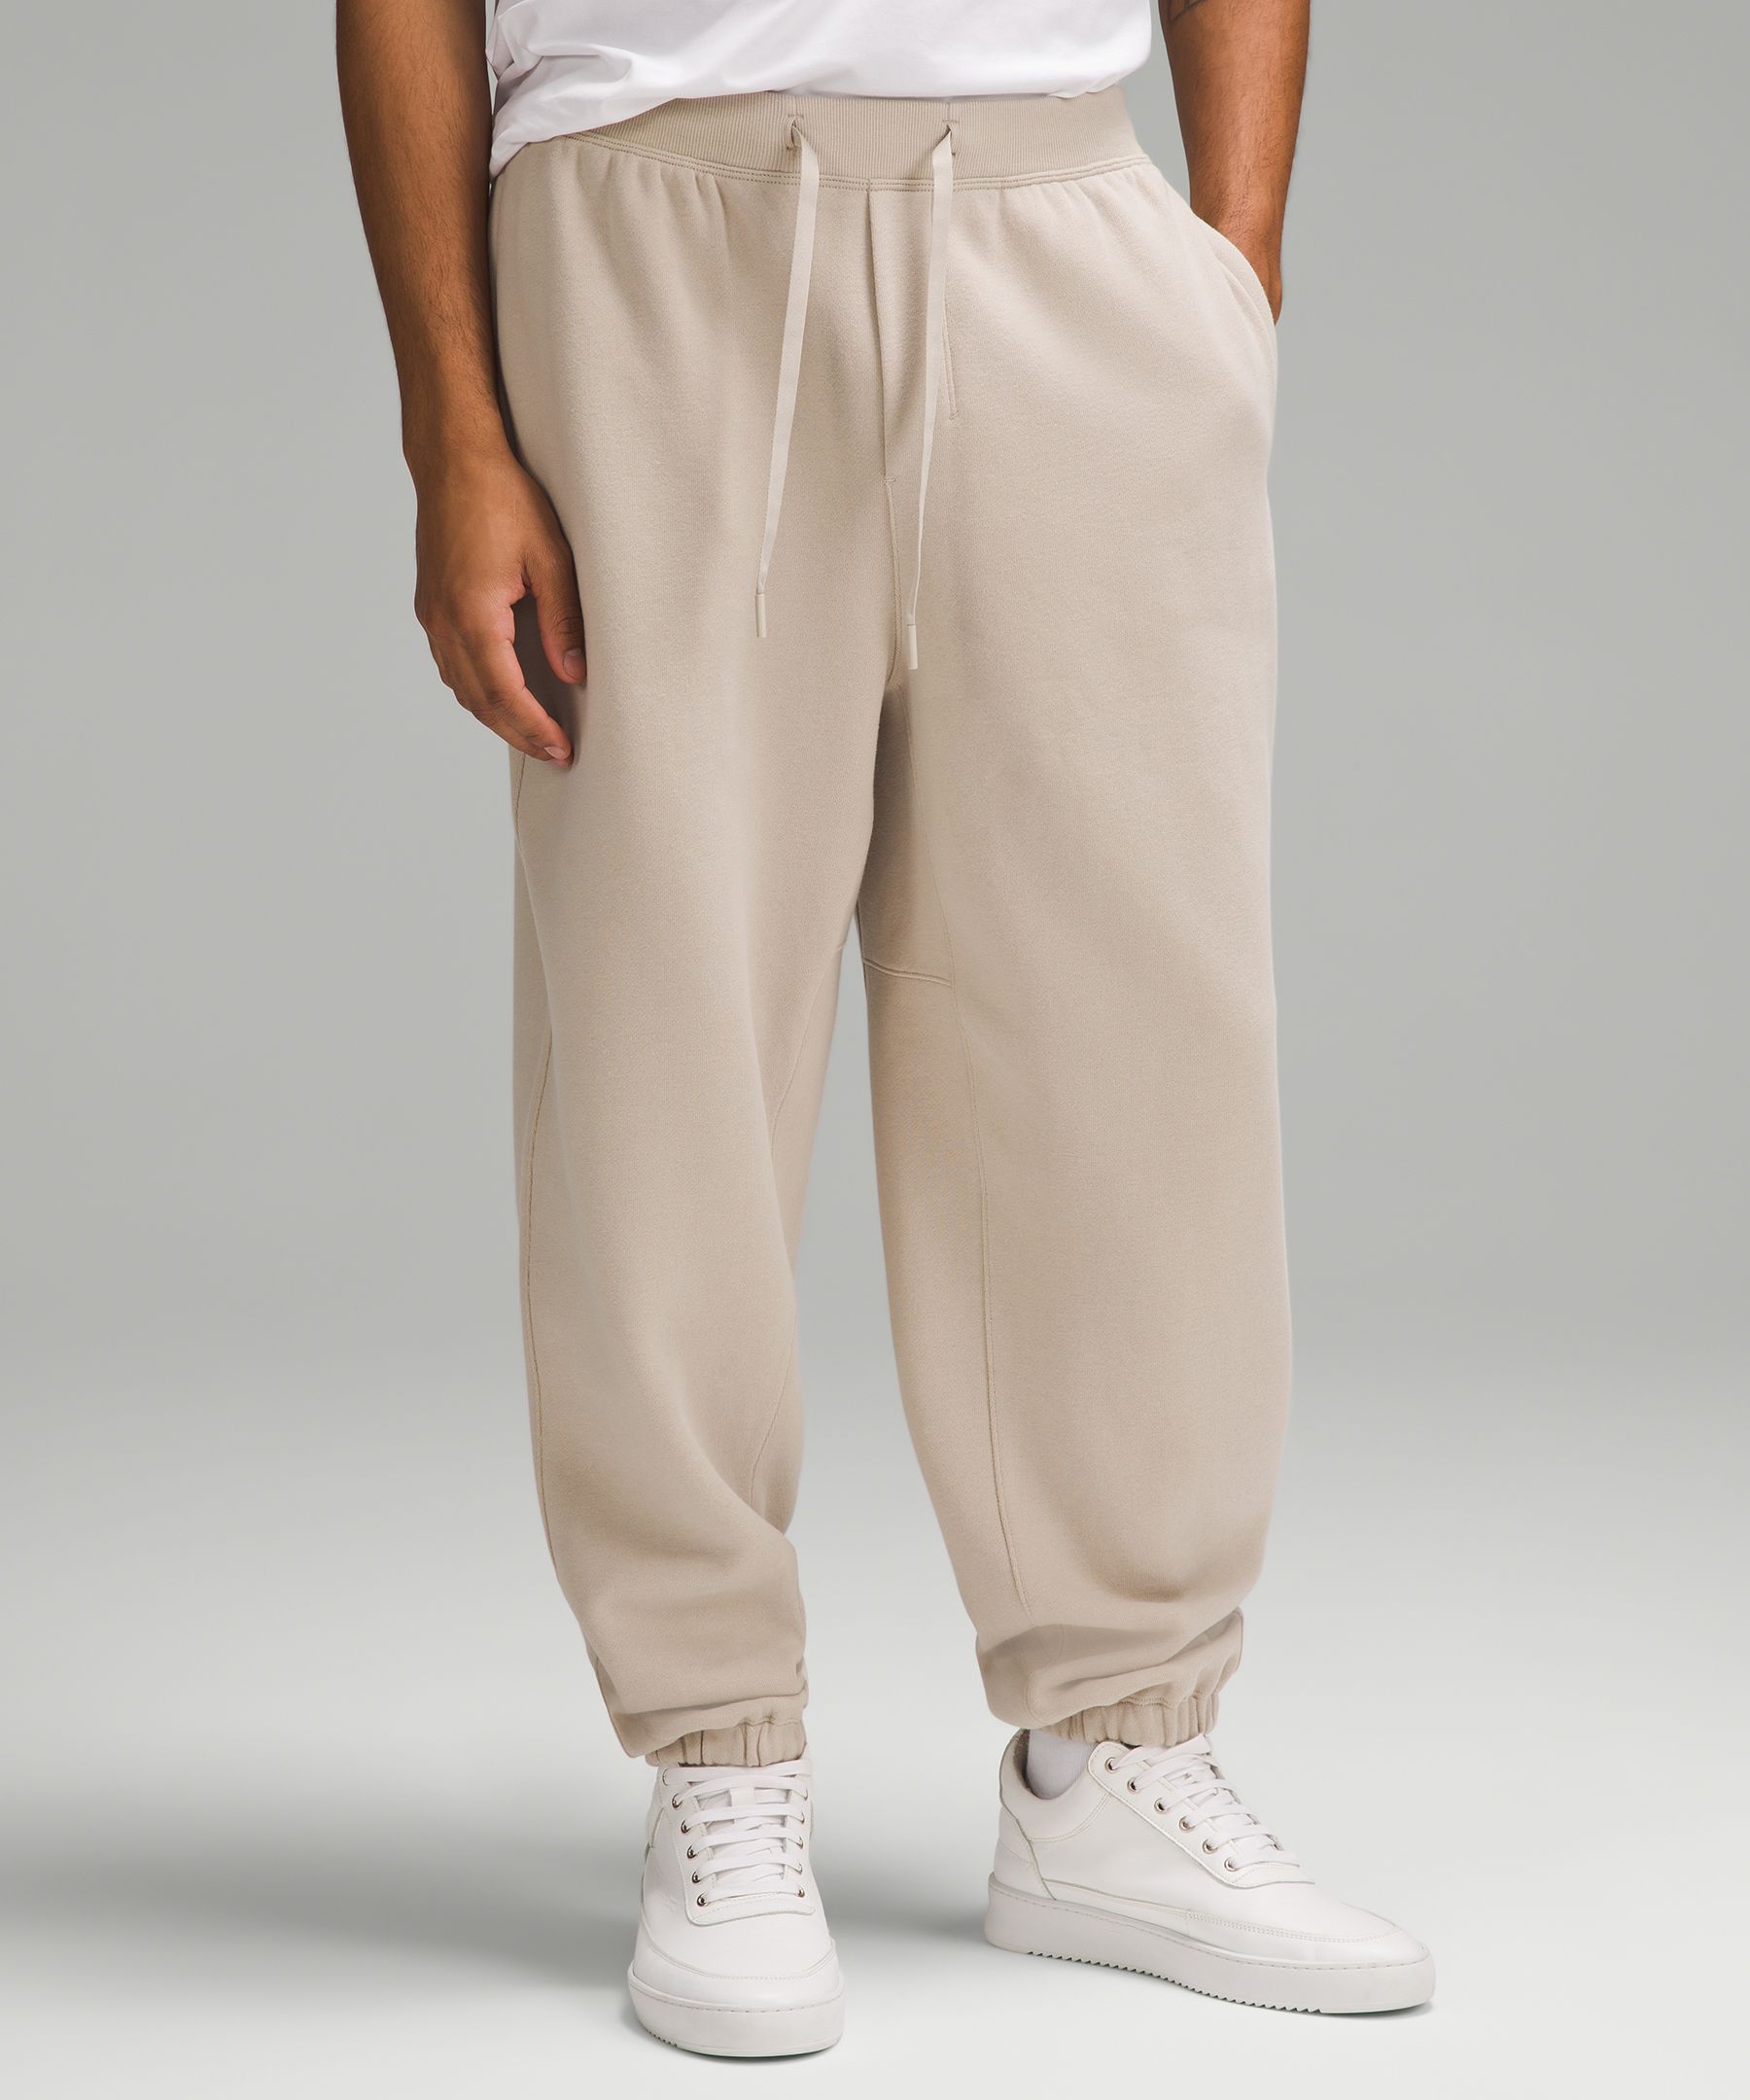 Lululemon athletica Steady State Pant, Men's Joggers